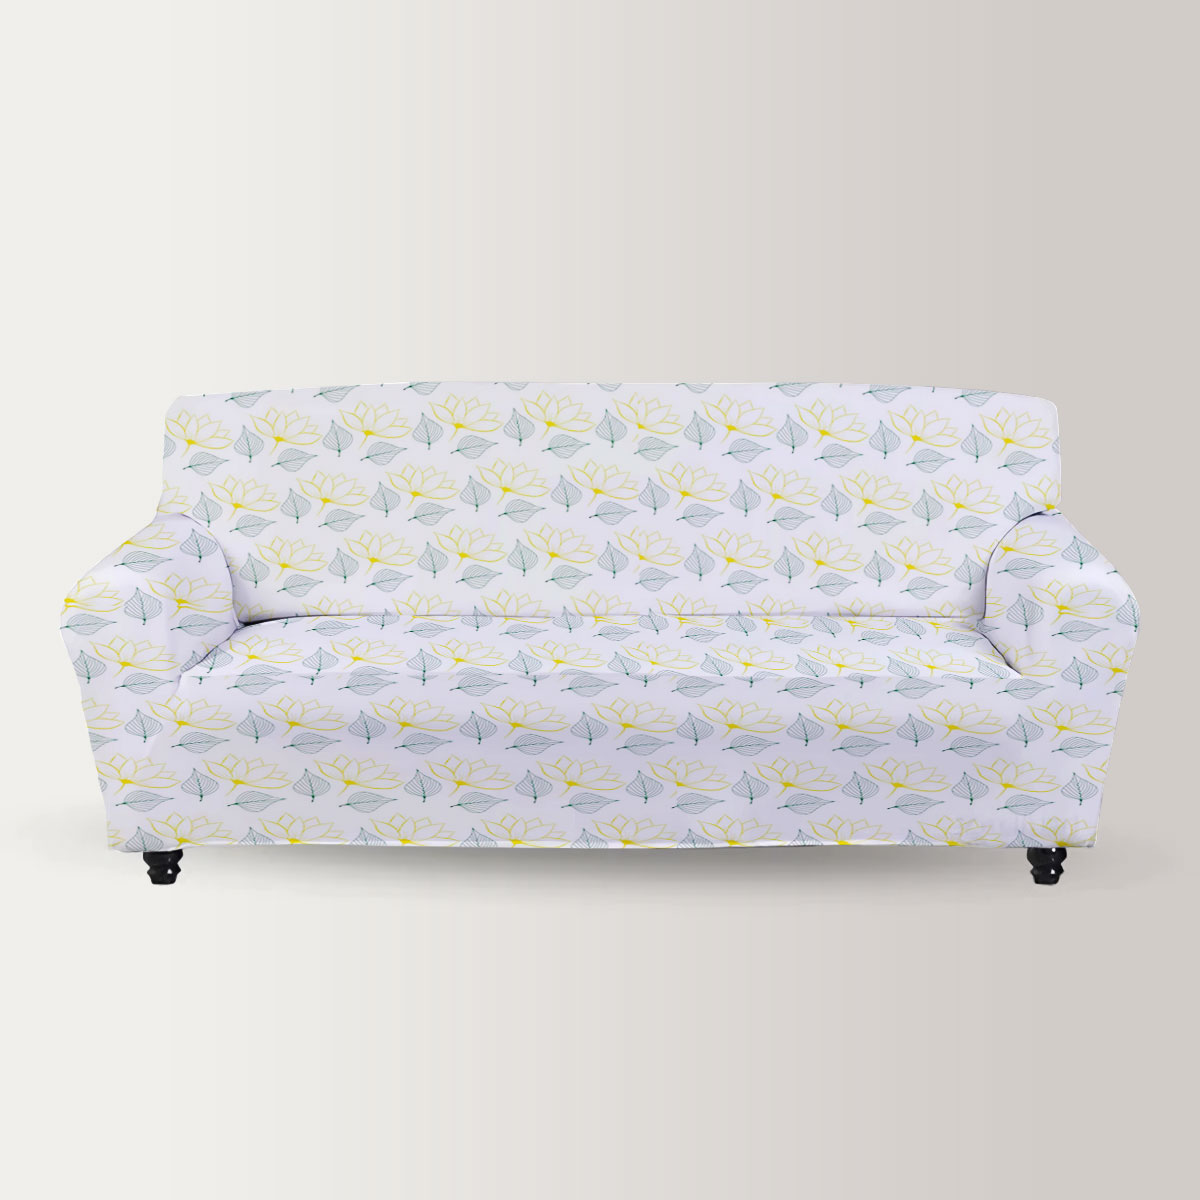 Magnolia With Leaves Seamless Pattern Sofa Cover